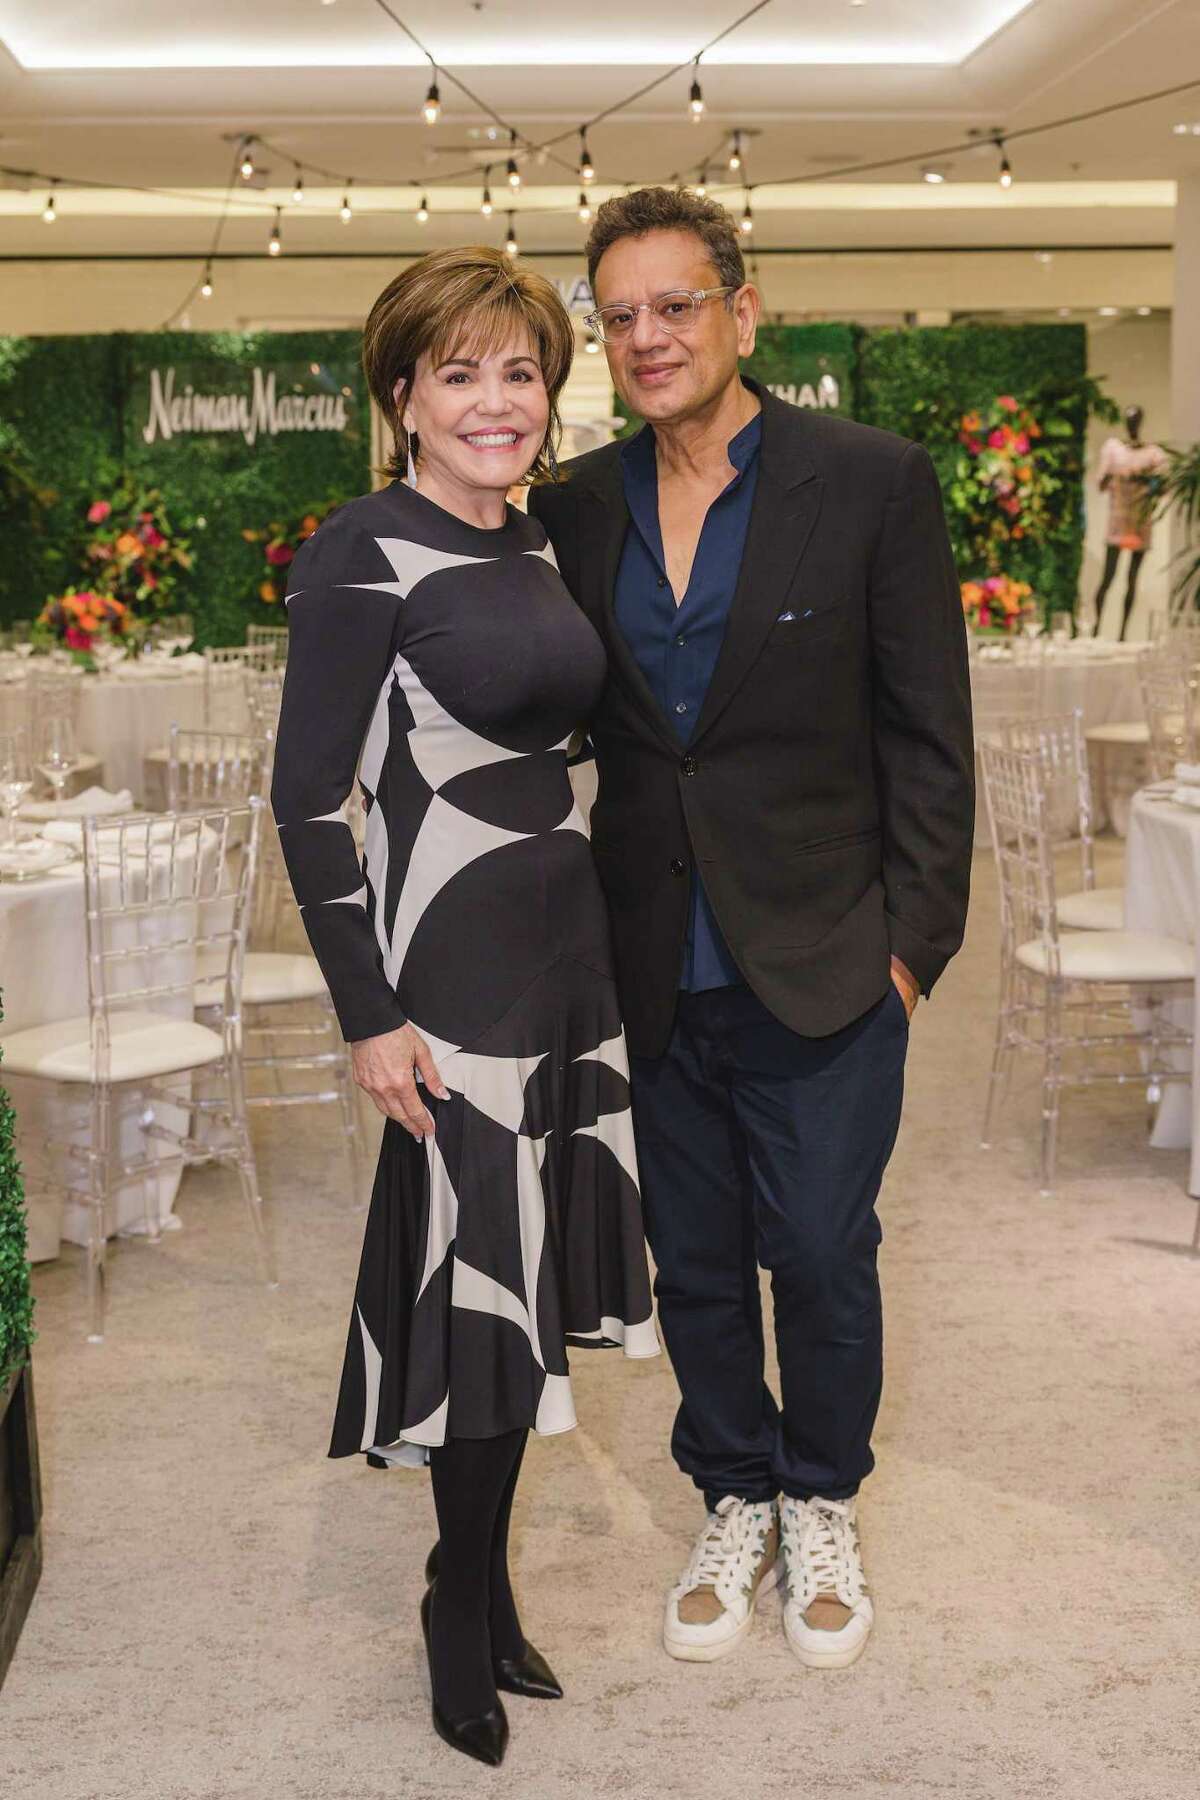 Naeem Khan is the featured designer of the Houston Chronicle's 2022 Best Dressed Luncheon chaired by Hallie Vanderhider.